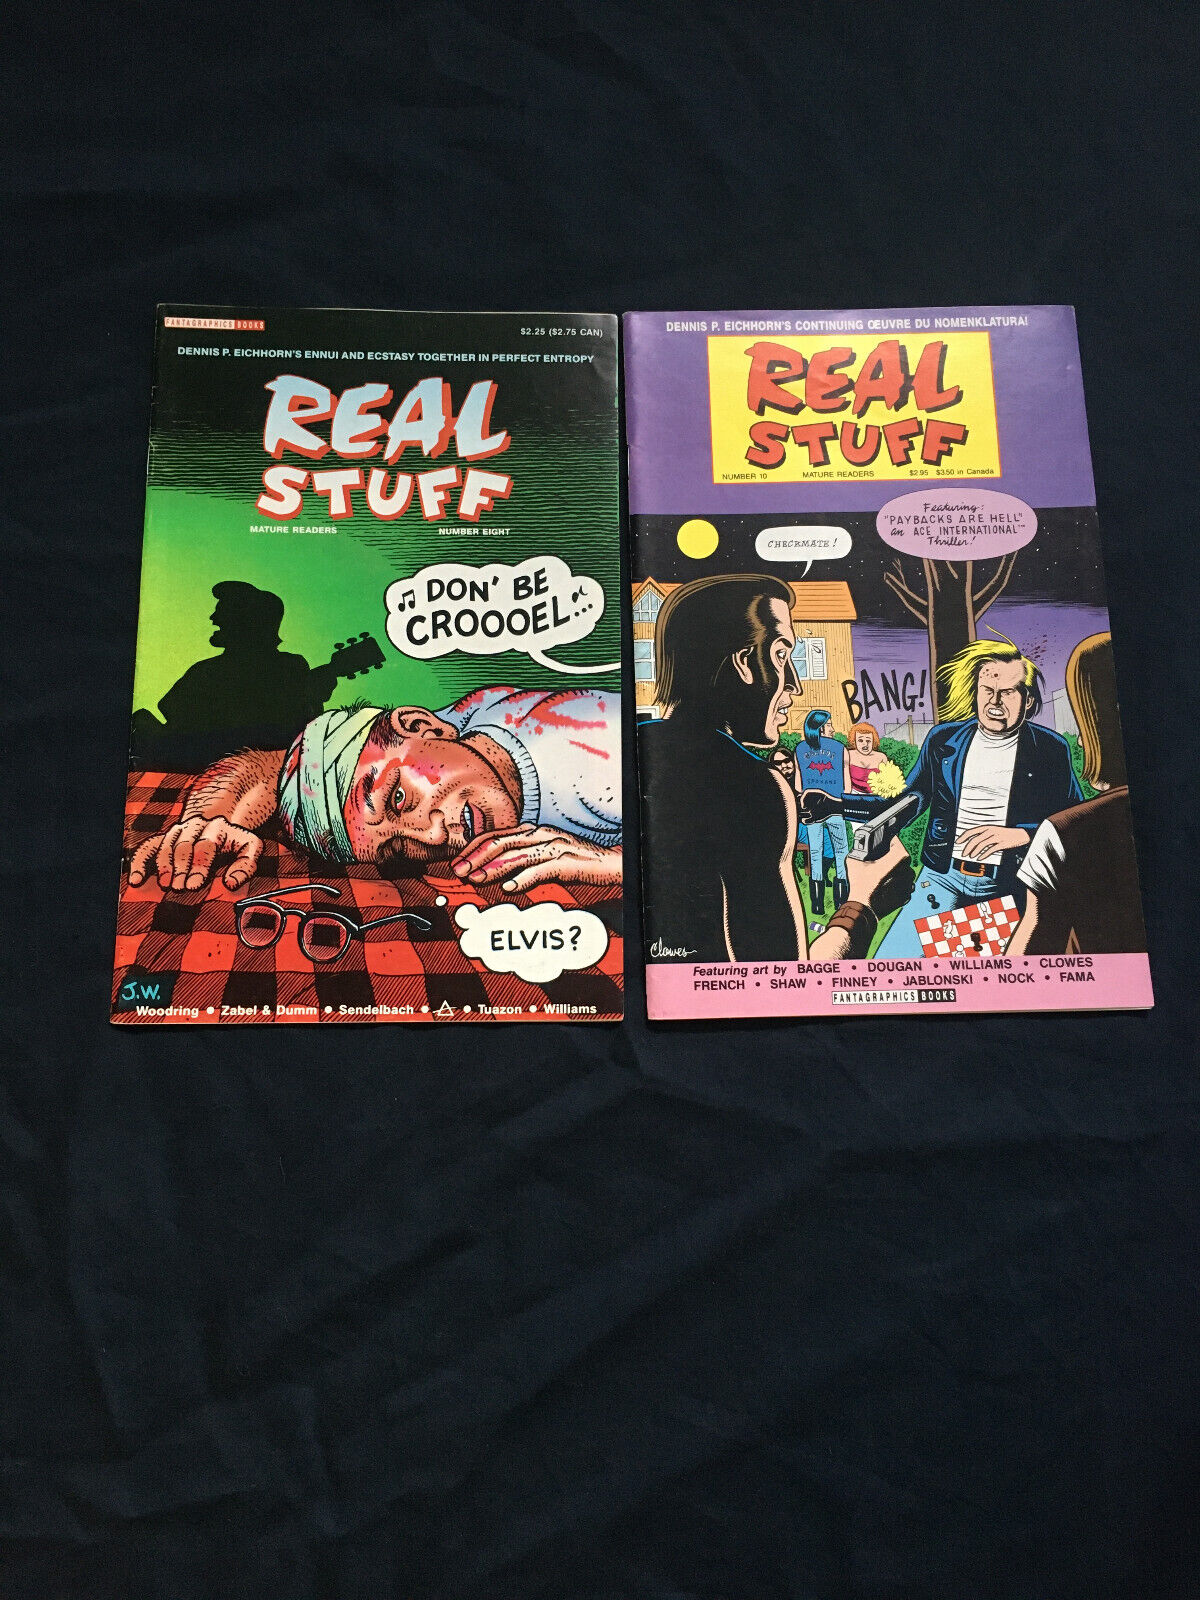 Lot of 2 Indie Comics Real Stuff#8 & #10 by Dennis P. Eichhorn and various